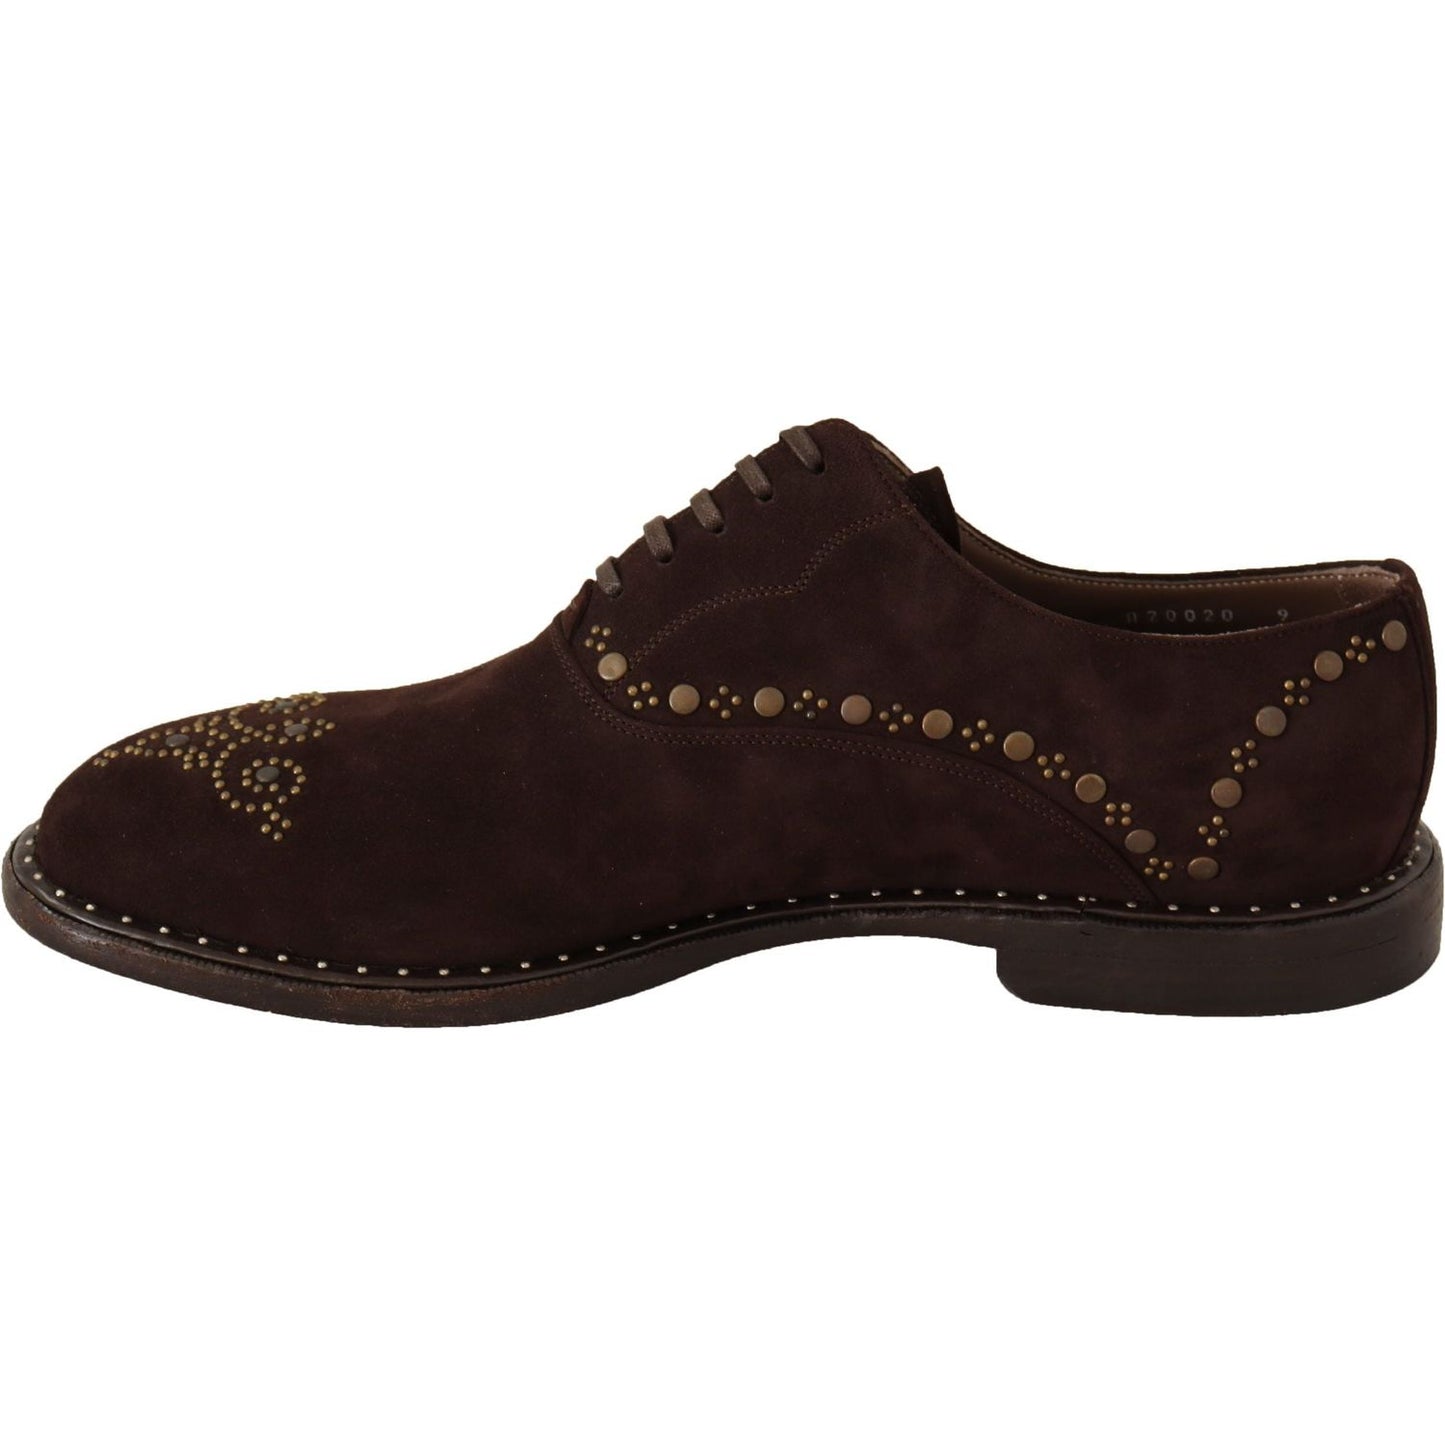 Dolce & Gabbana Elegant Brown Suede Studded Derby Shoes Dress Shoes brown-suede-marsala-derby-studded-shoes IMG_0015-scaled-1e2f81e1-eb3.jpg